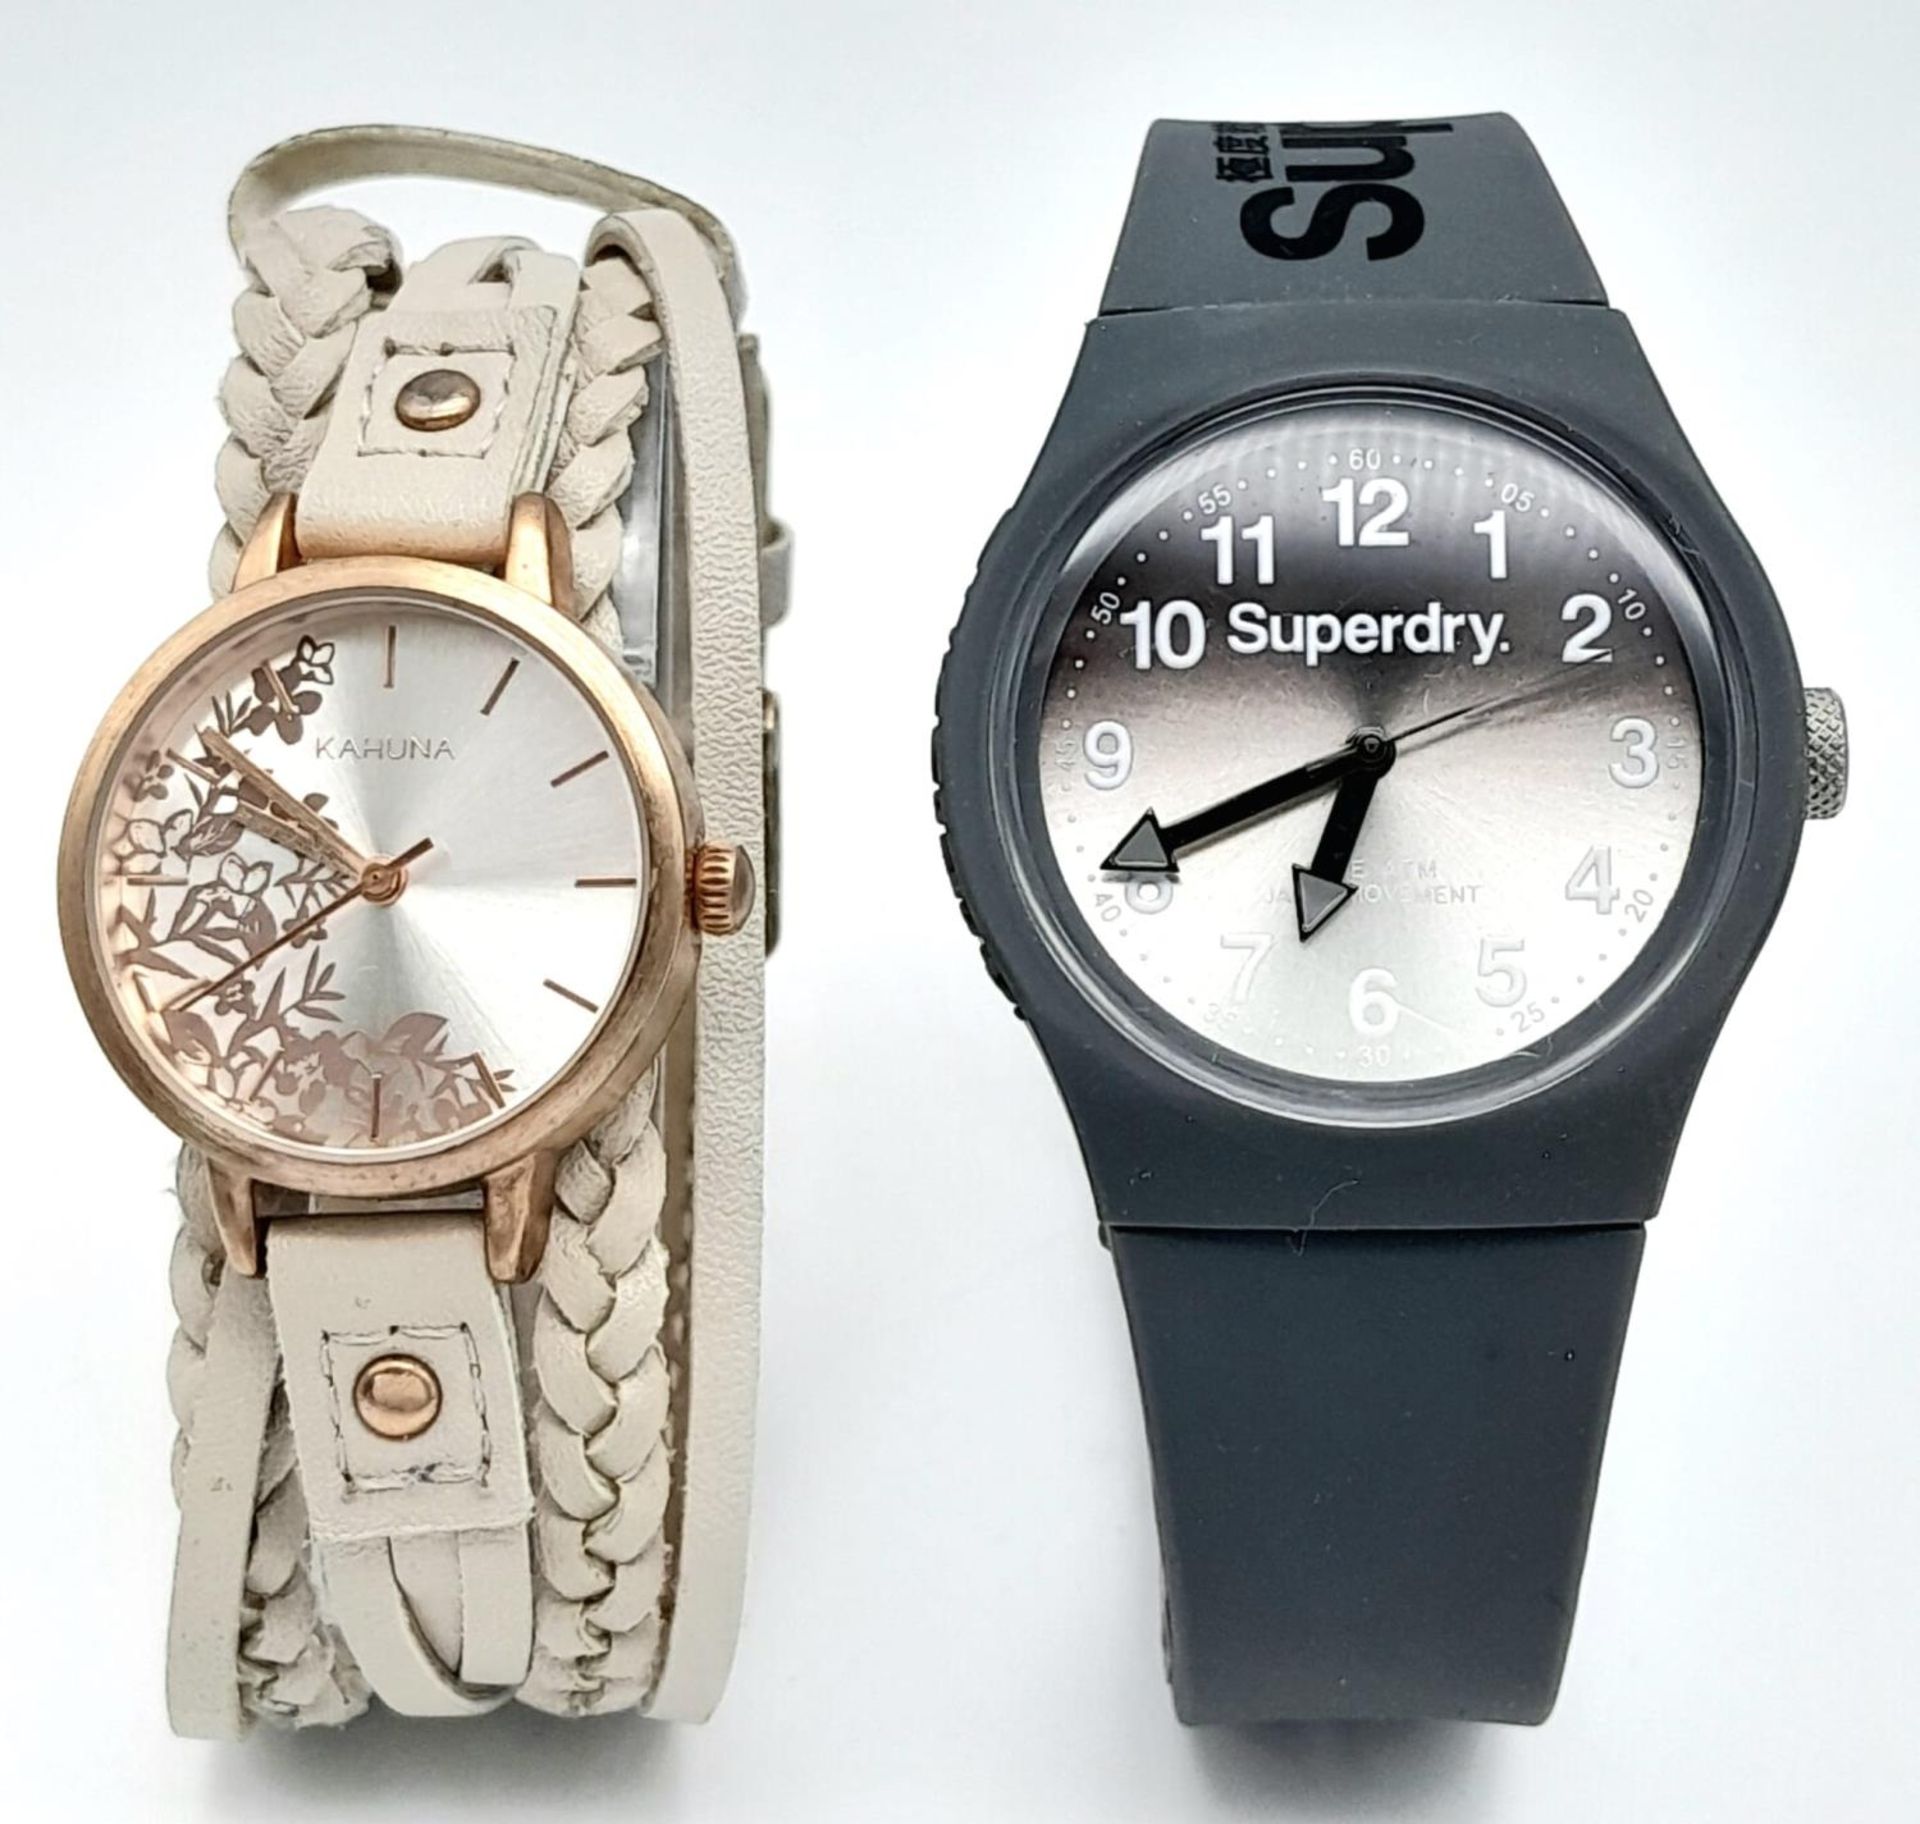 Two Ex Display Beach/Surf Watches, One Men’s, One Ladies Comprising 1) A Rubber strapped Quartz